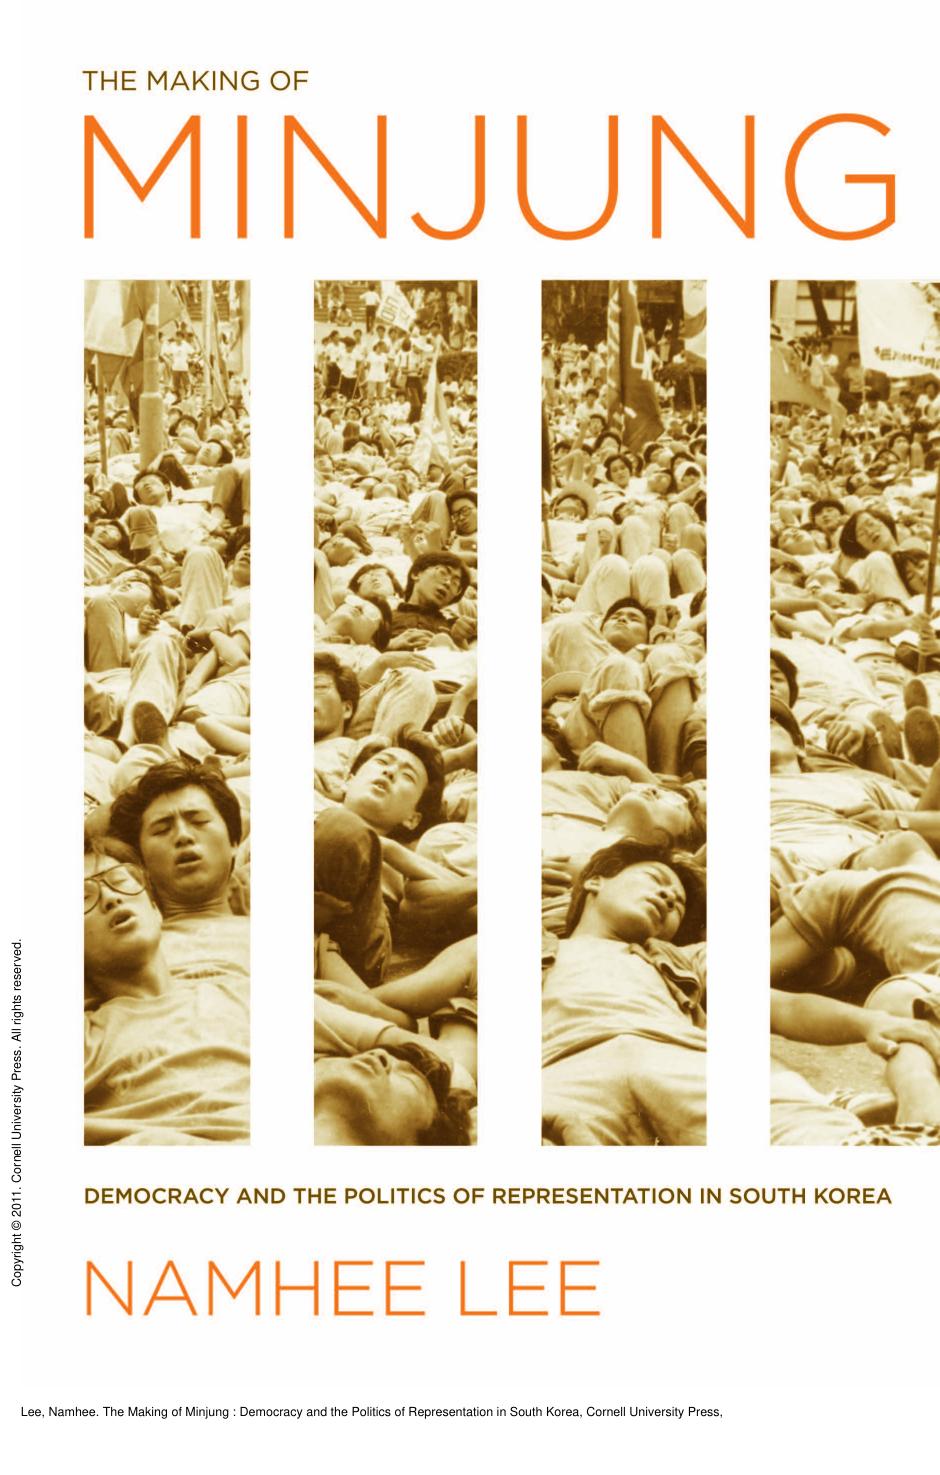 The Making of Minjung : Democracy and the Politics of Representation in South Korea by Namhee Lee